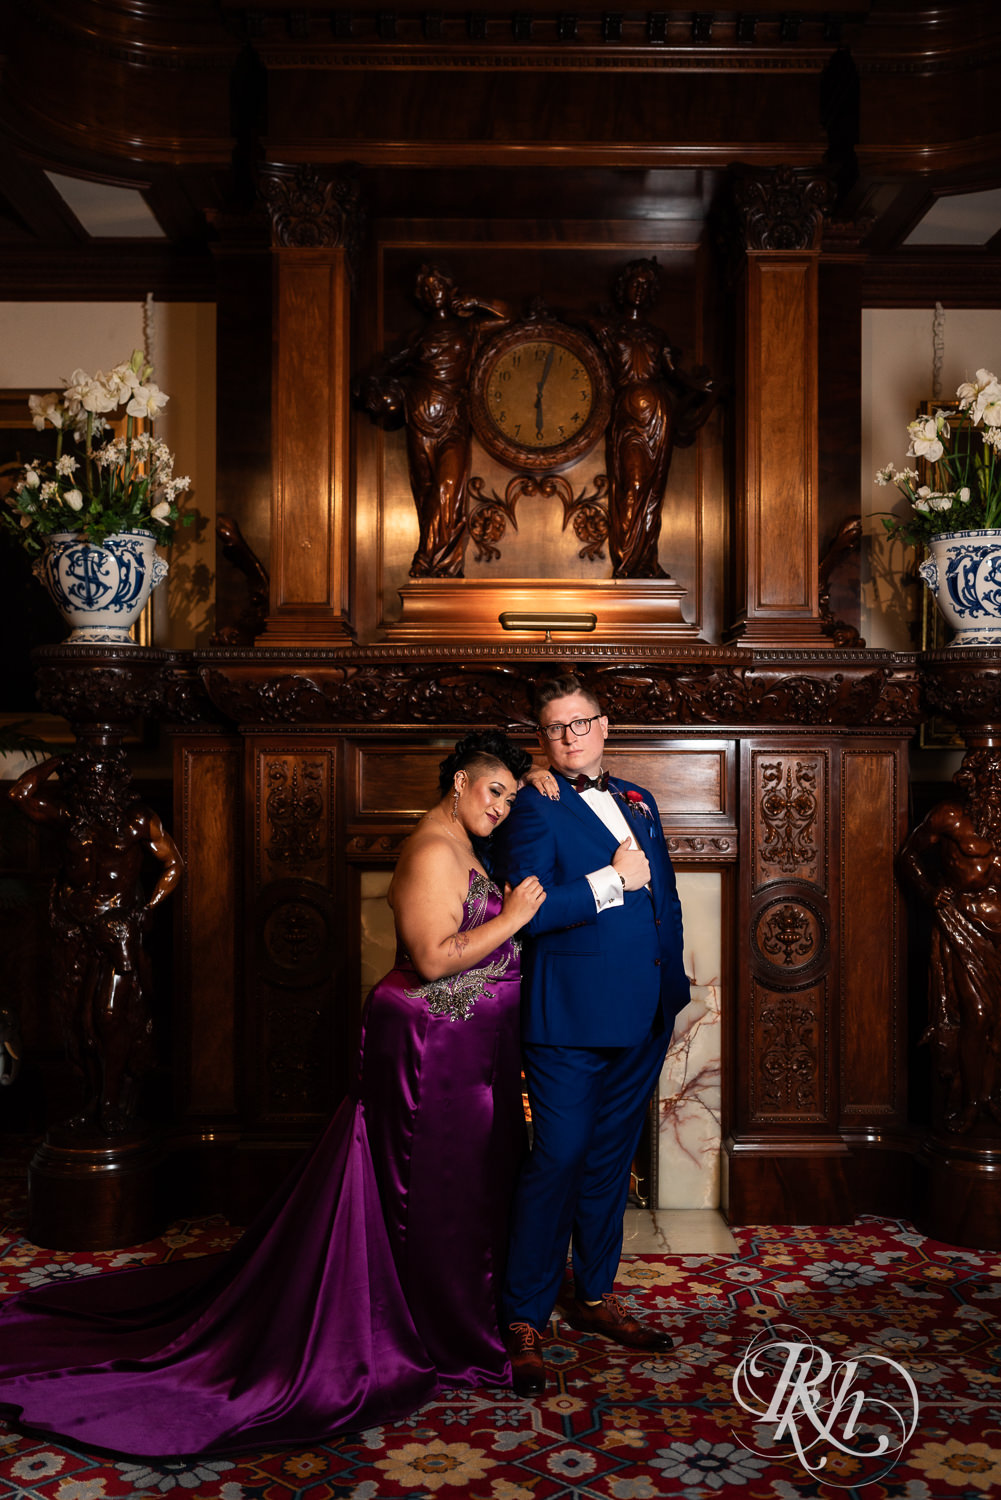 Filipino bride with mohawk dressed in purple wedding dress and groom stand in front of fireplace at American Swedish Institute in Minnesota.